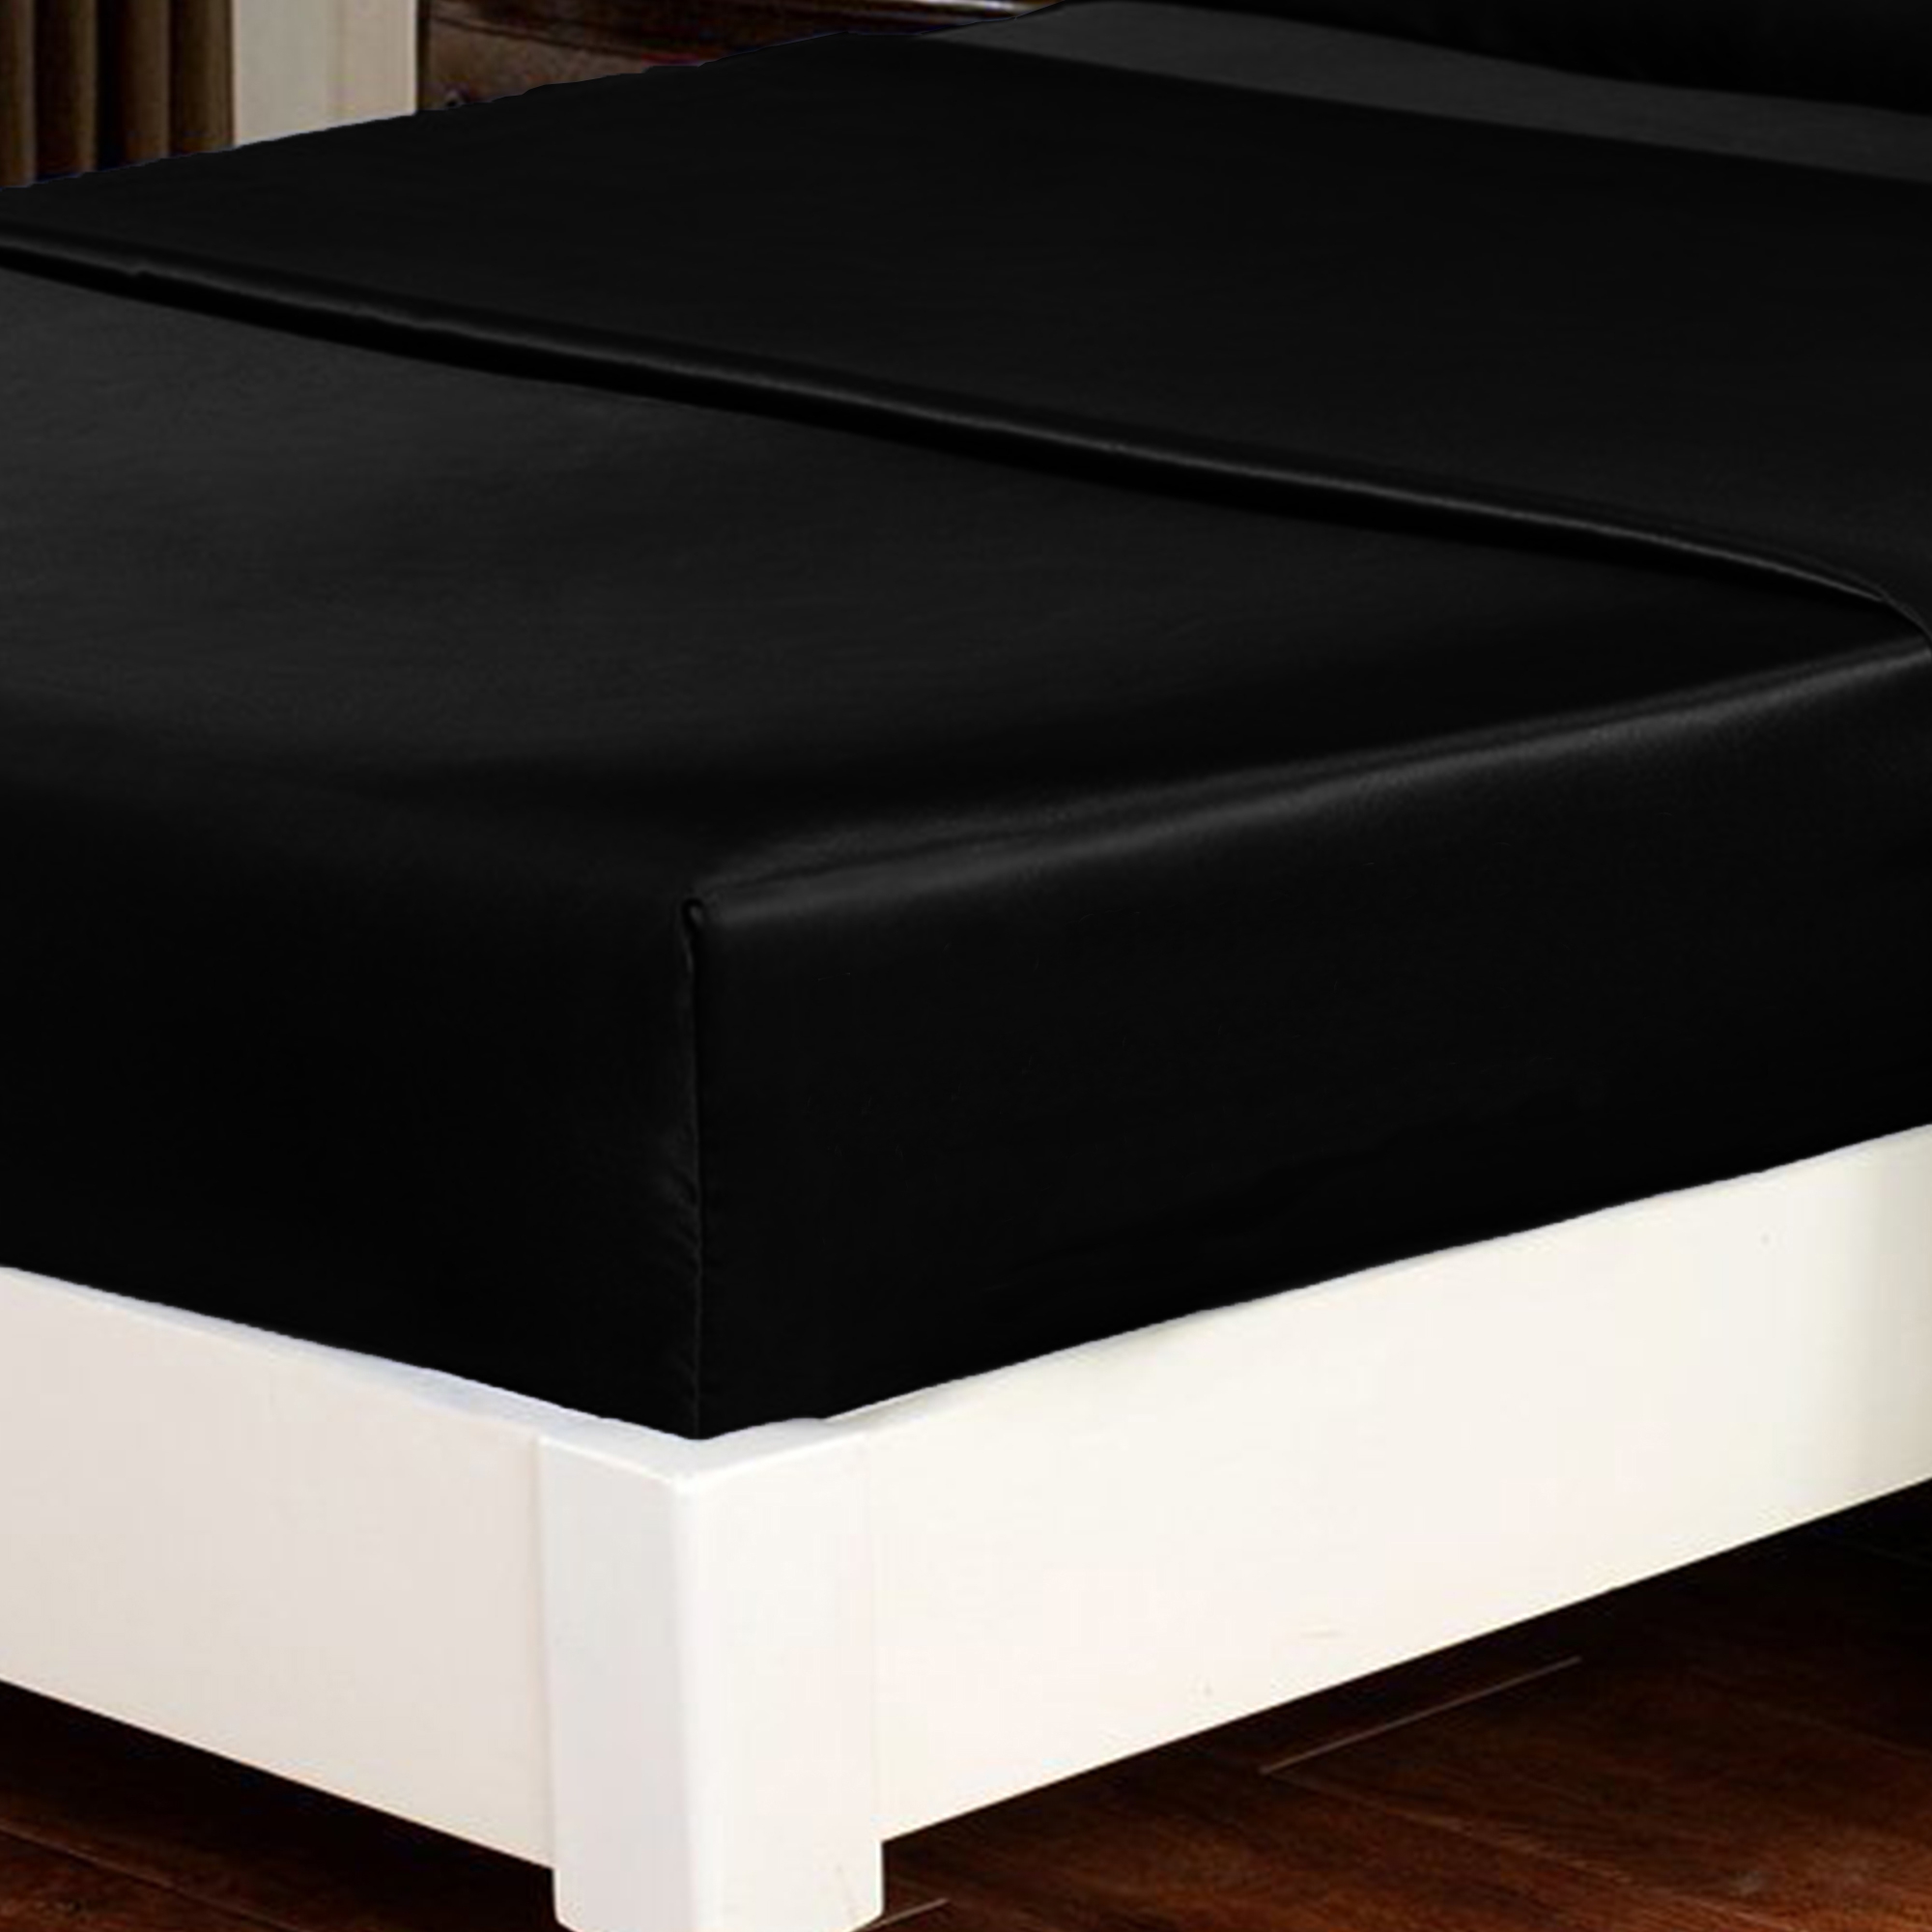 Black Satin Fitted Sheet King Bed